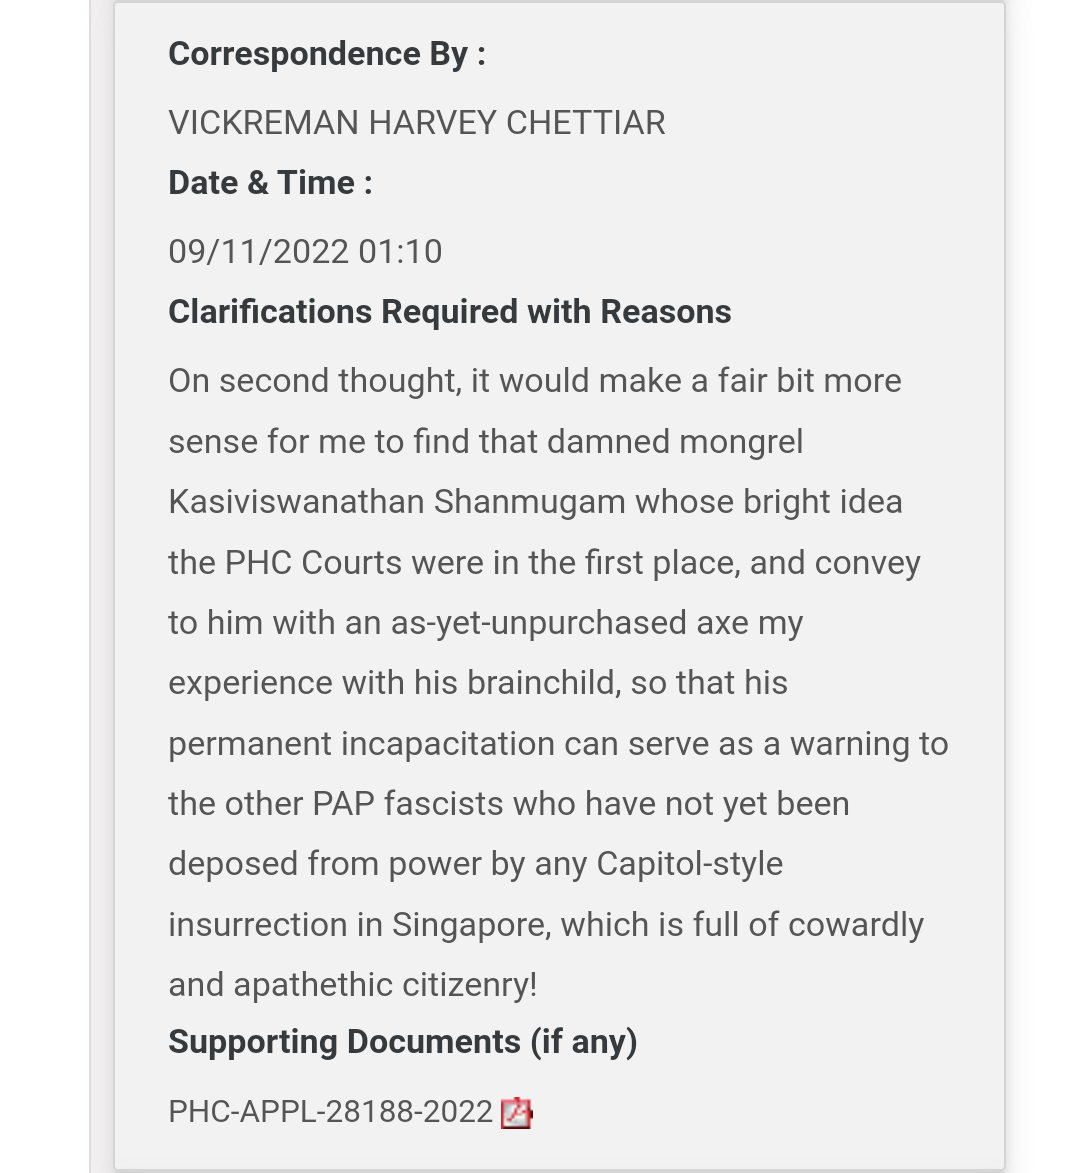 Screenshot of CJTS correspondence, submitted by Harvey on 11 November 2022, at 1:10am. Message reads: "On second thought, it would make a fair bit more sense for me to find that damned mongrel Kasiviswanathan Shanmugam whose bright idea the PHC Courts were in the first place, and convey to him with an as-yet-unpurchased axe my experience with his brainchild, so that his permanent incapacitation can serve as a warning to the other PAP fascists who have not yet been deposed from power by any Capitol-style insurrection in Singapore, which is full of cowardly and apathetic citizenry!" Supporting document attached is a file titled 'PHC-APPL-28188-2022'.